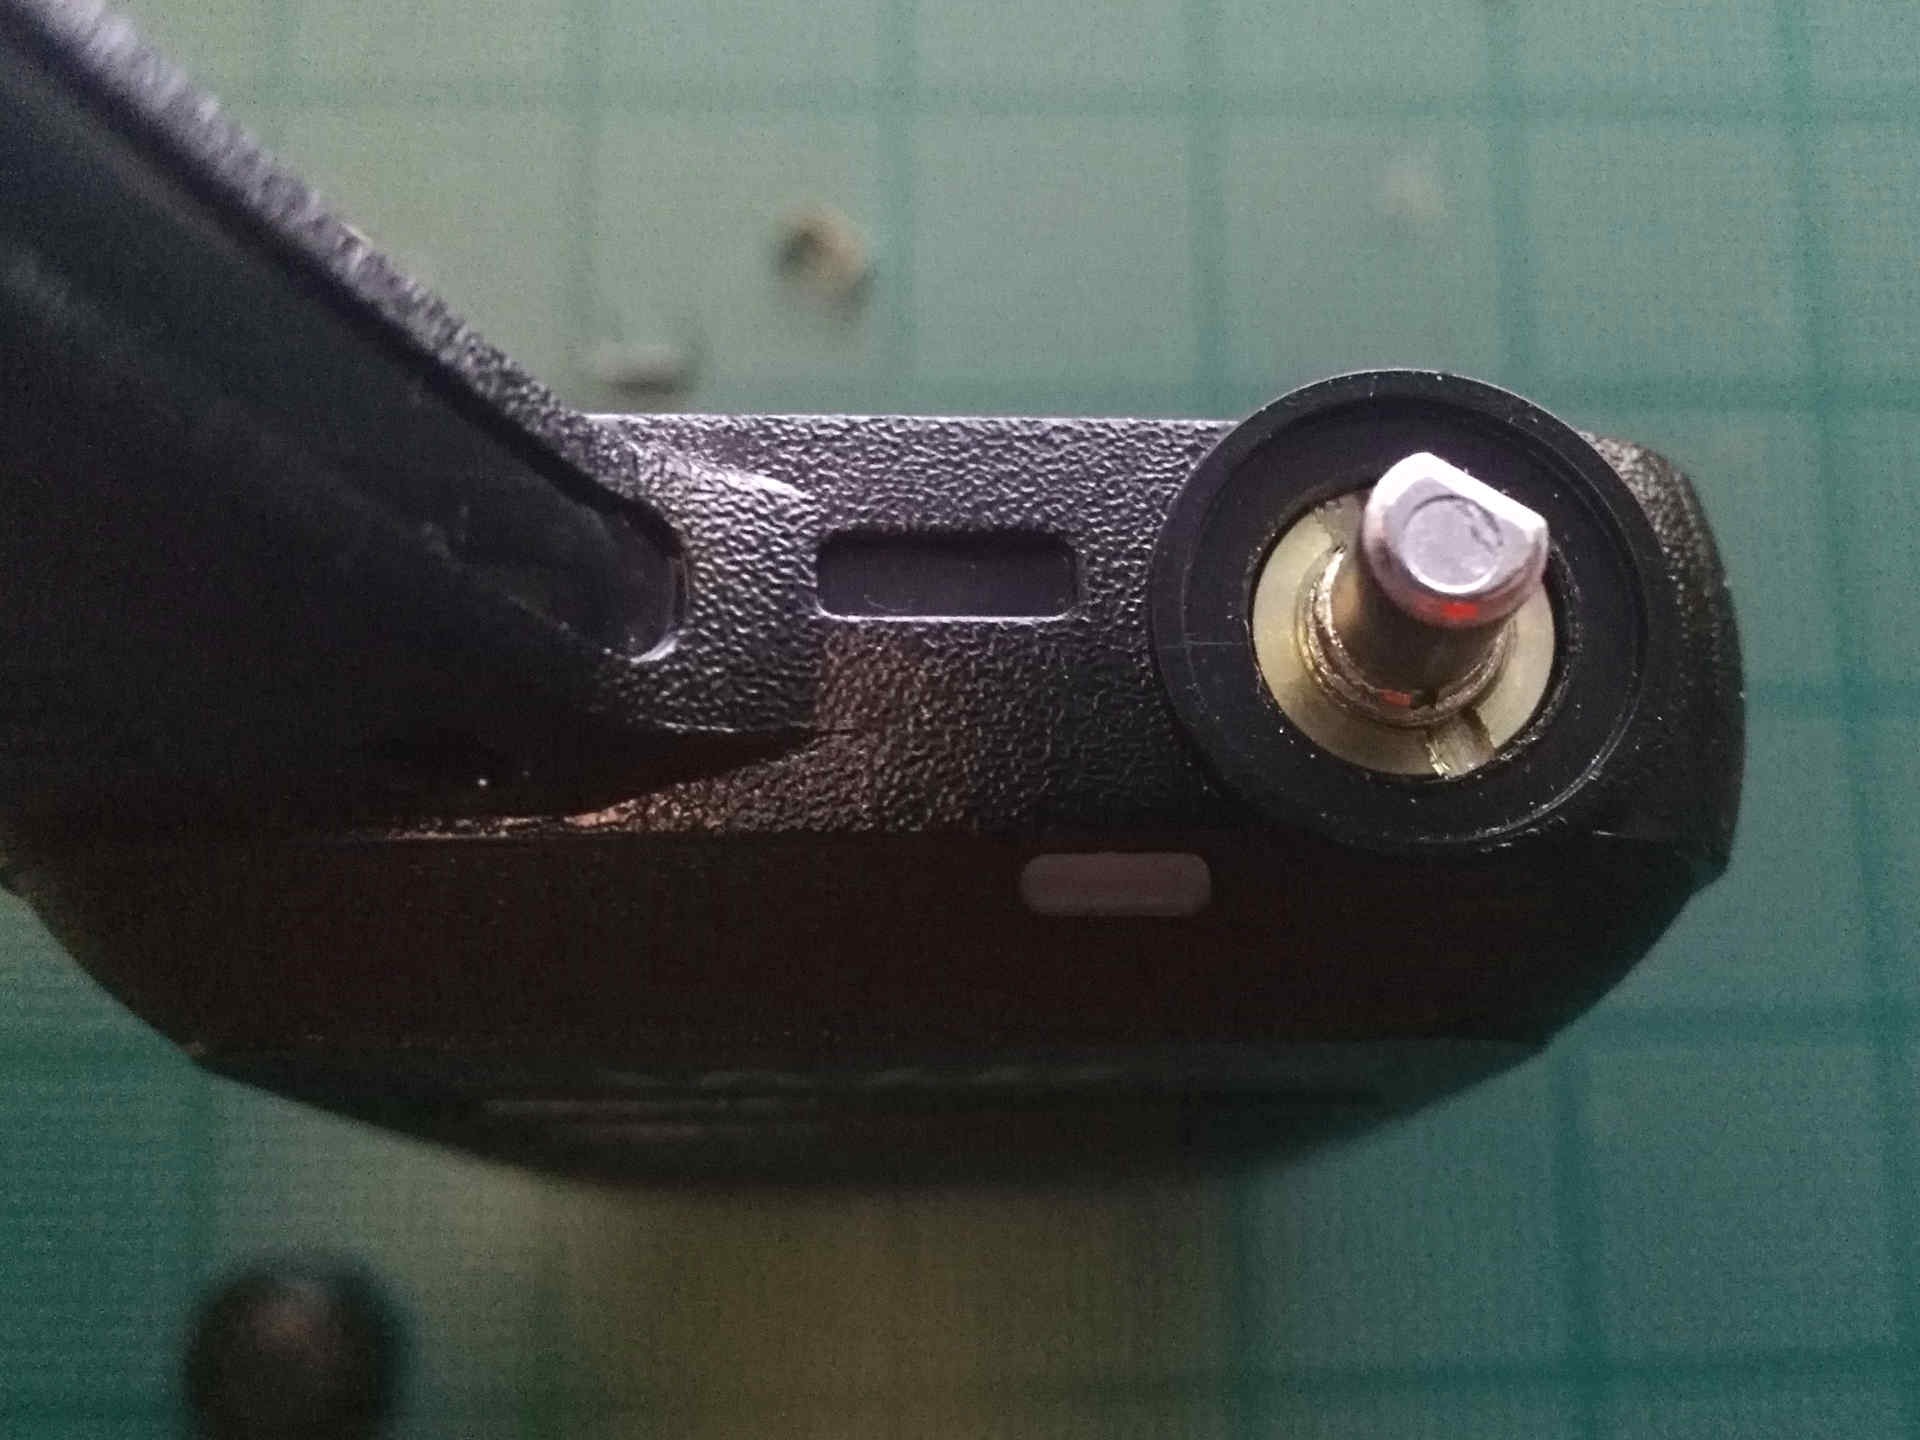 Nut attaching potentiometer to case